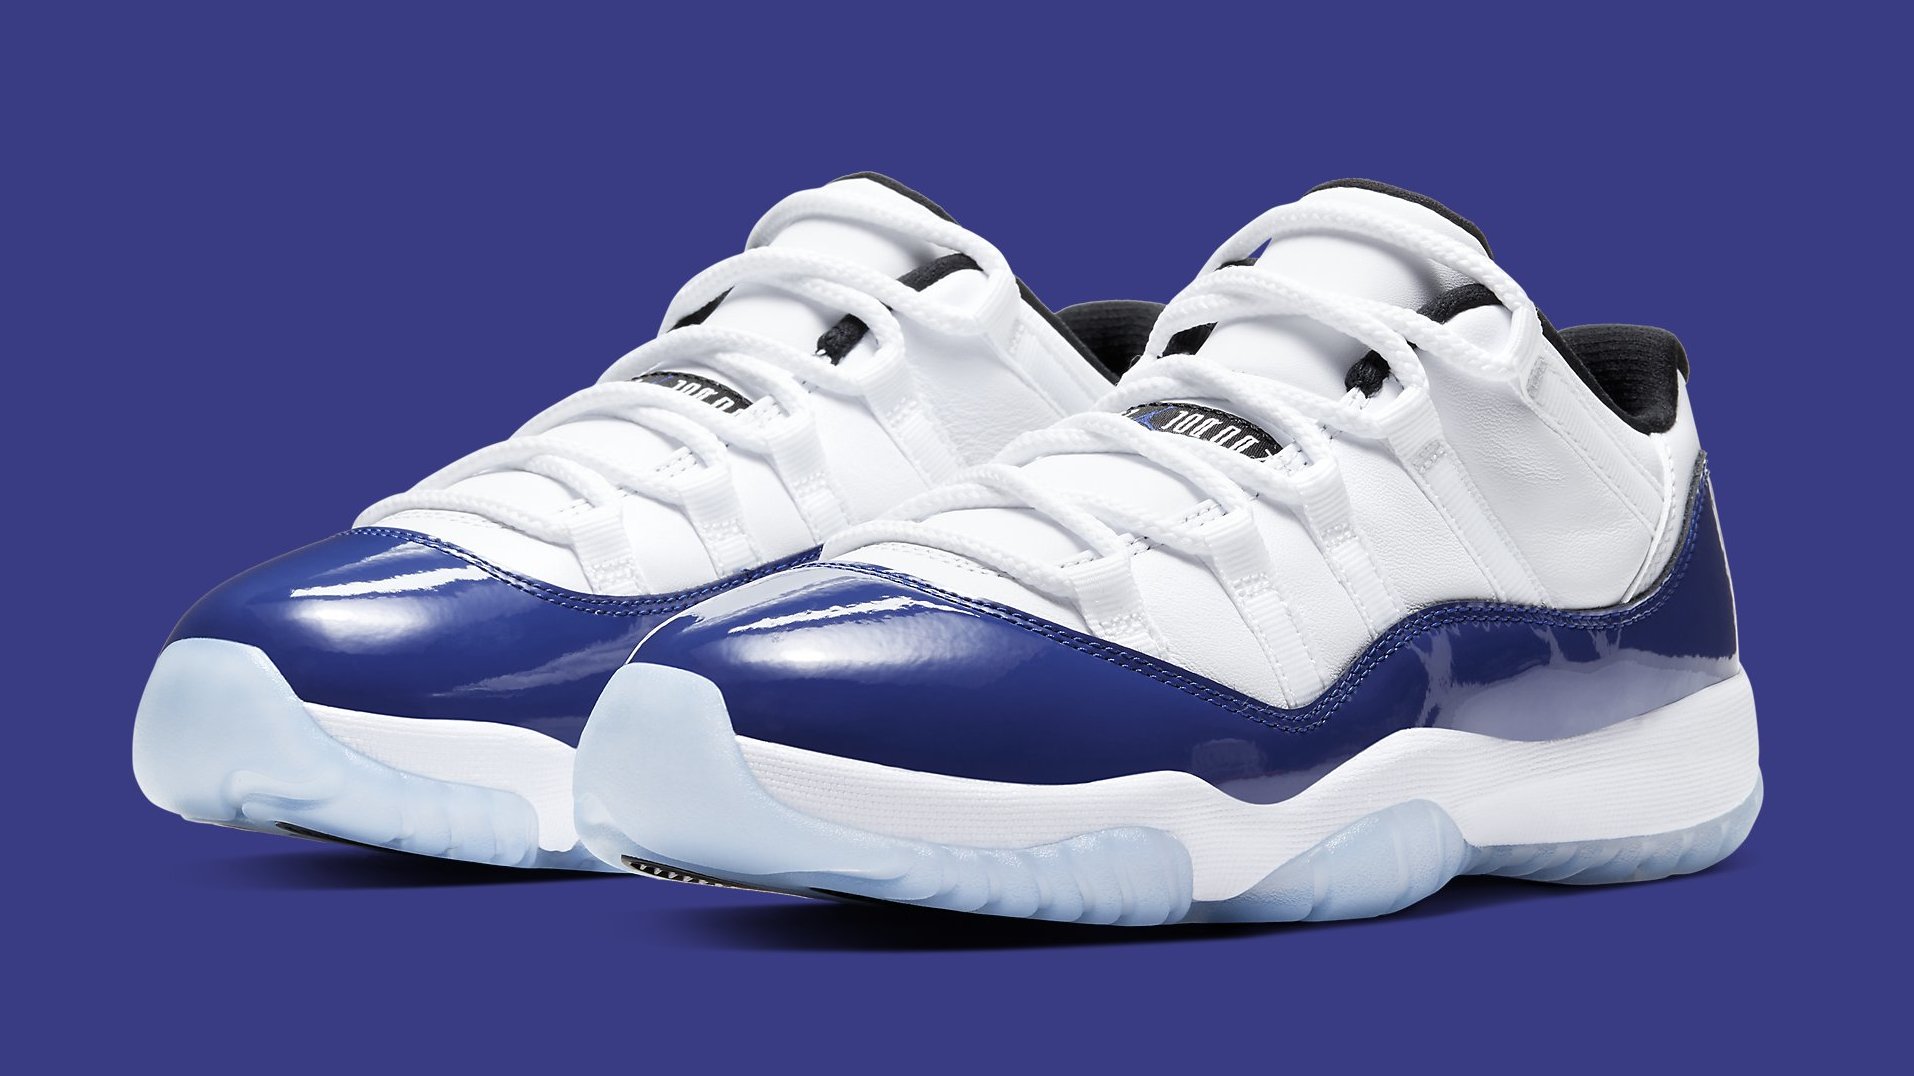 Concord Sketch' Air Jordan 11 Low Release Gets Pushed Back | Complex